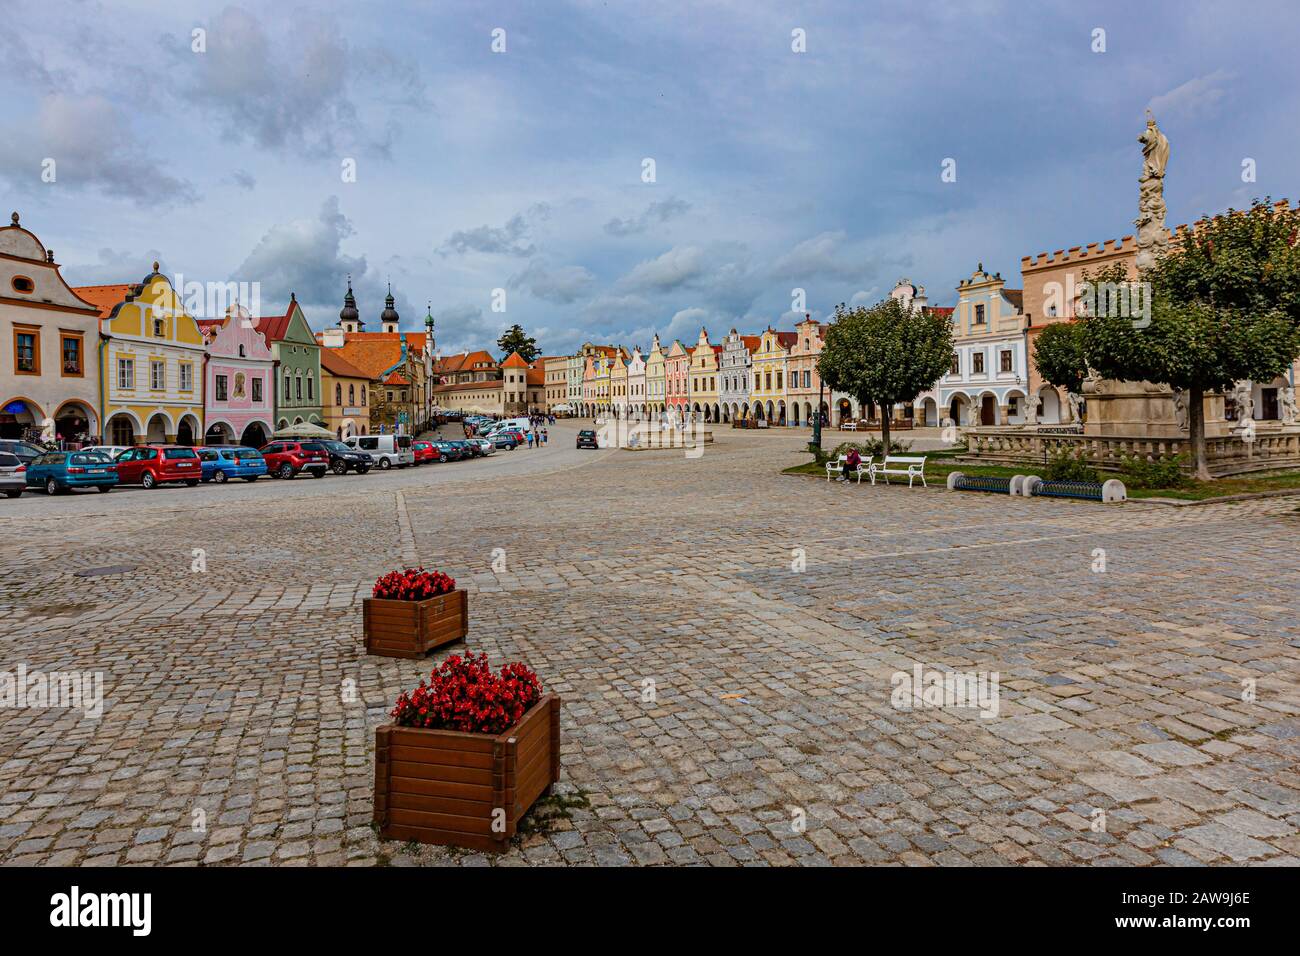 Telc / Czech Republic - September 27 2019: View of the historical city centre, UNESCO world heritage place with houses, trees and cobblestone street. Stock Photo